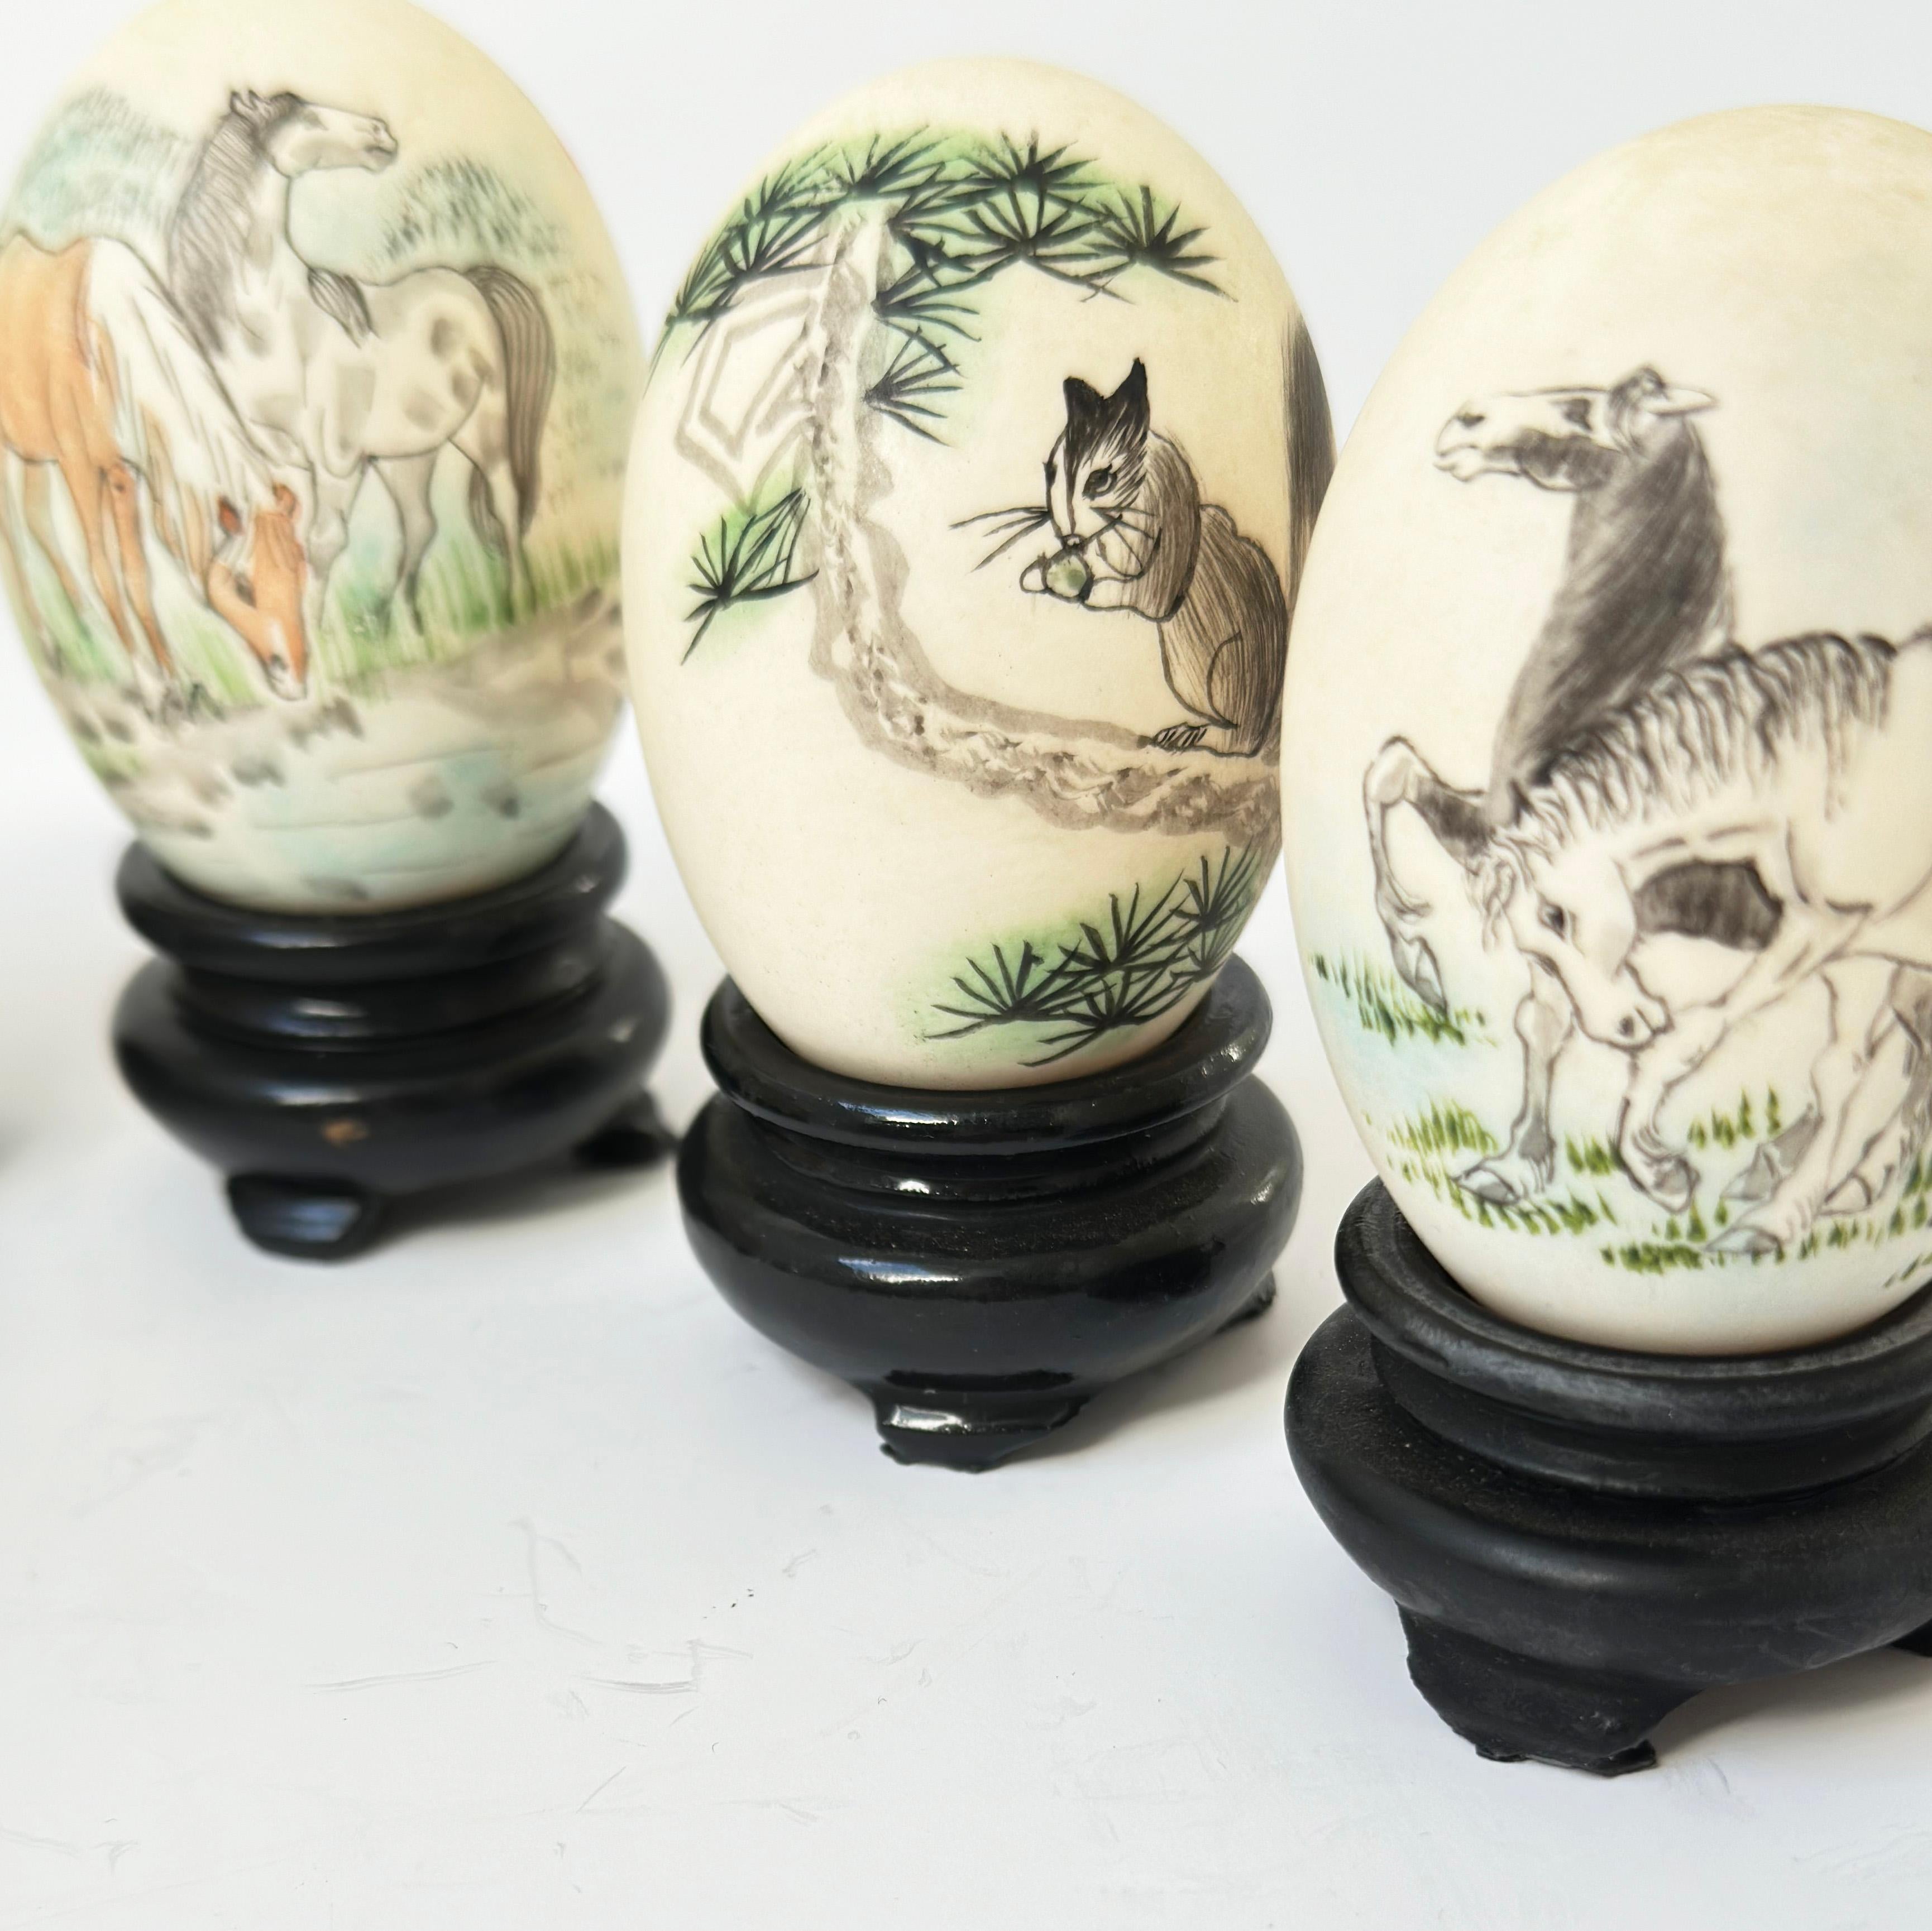 Vintage Chinese Painted Eggs: This collection features a selection of hand-painted eggshells, each showcased on a carved wooden plinth. These pieces were crafted by skilled eggshell artists in China during the 1970s. The intricately applied